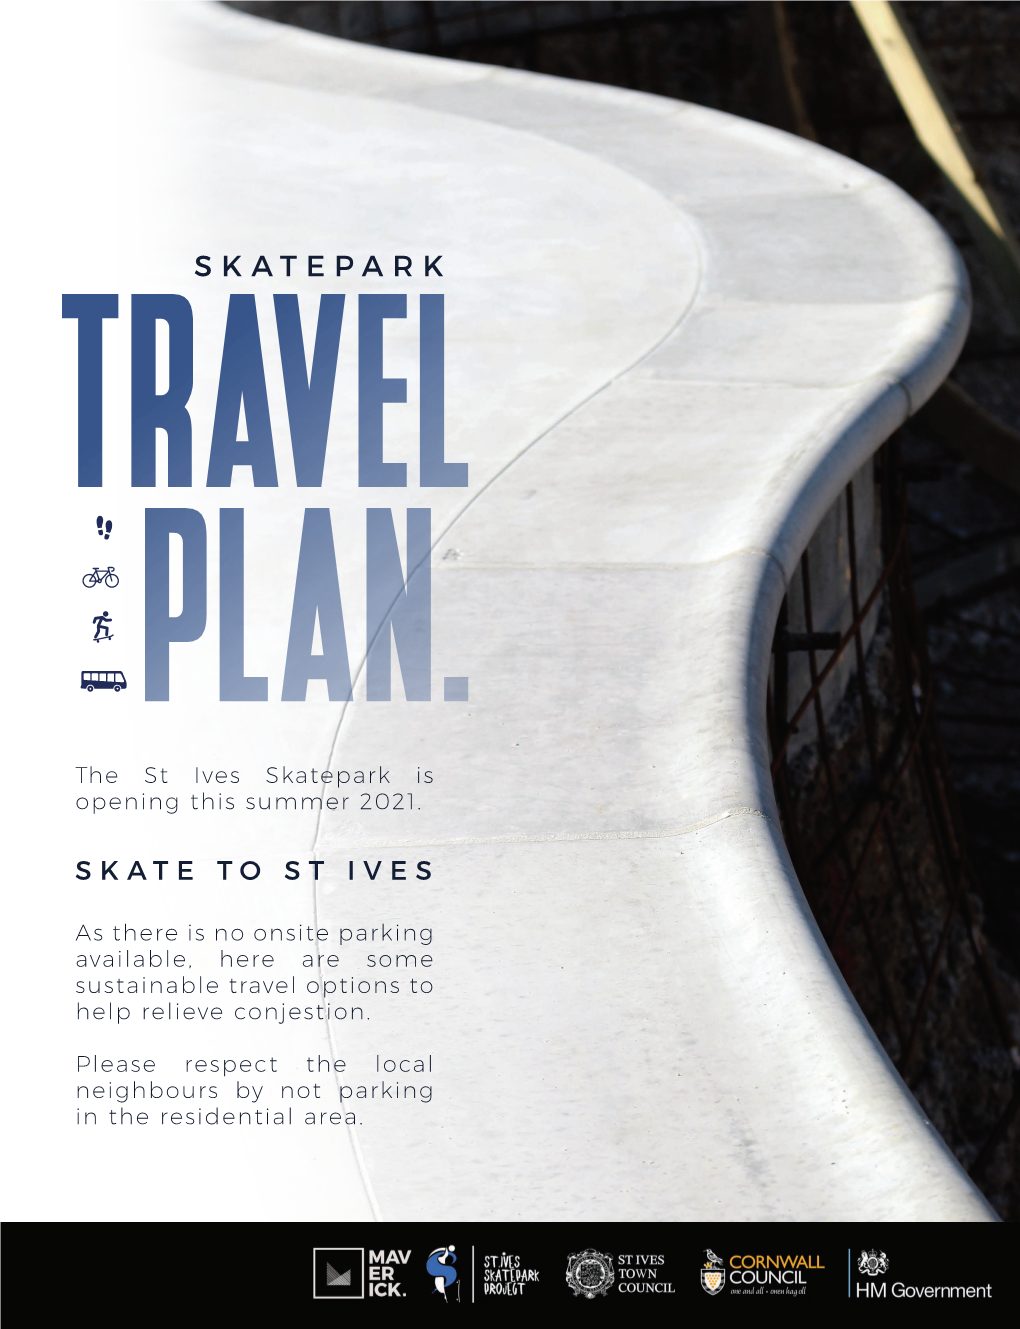 St Ives Skatepark Is Opening This Summer 2021